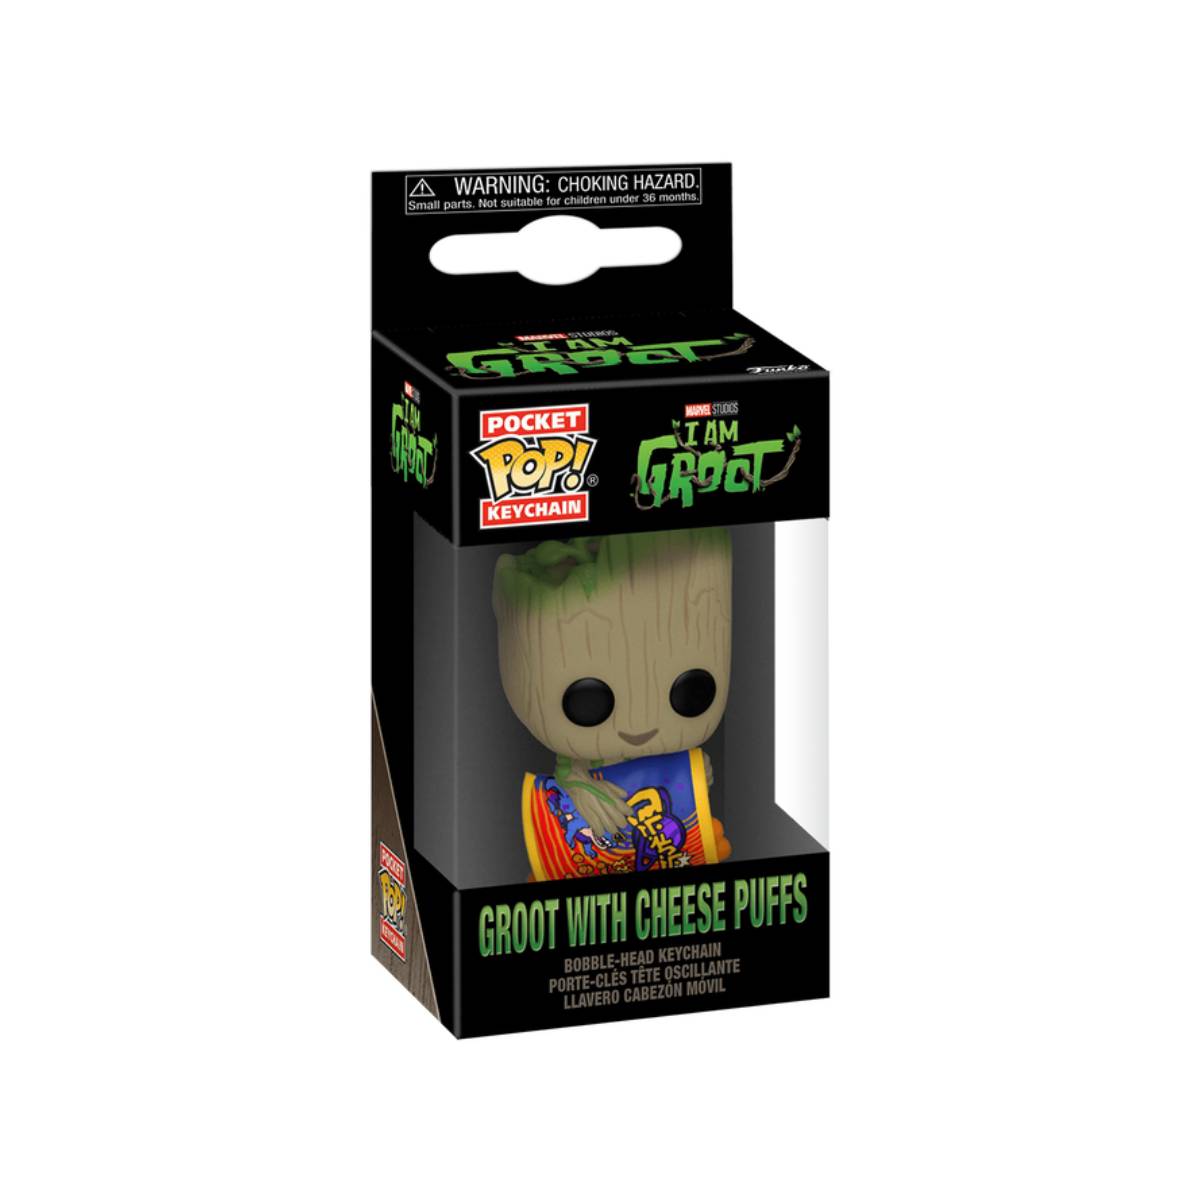 FUNKO KEYCHAIN MARVEL STUDIO I AM GROOT GROOT WITH CHEESE PUFFS